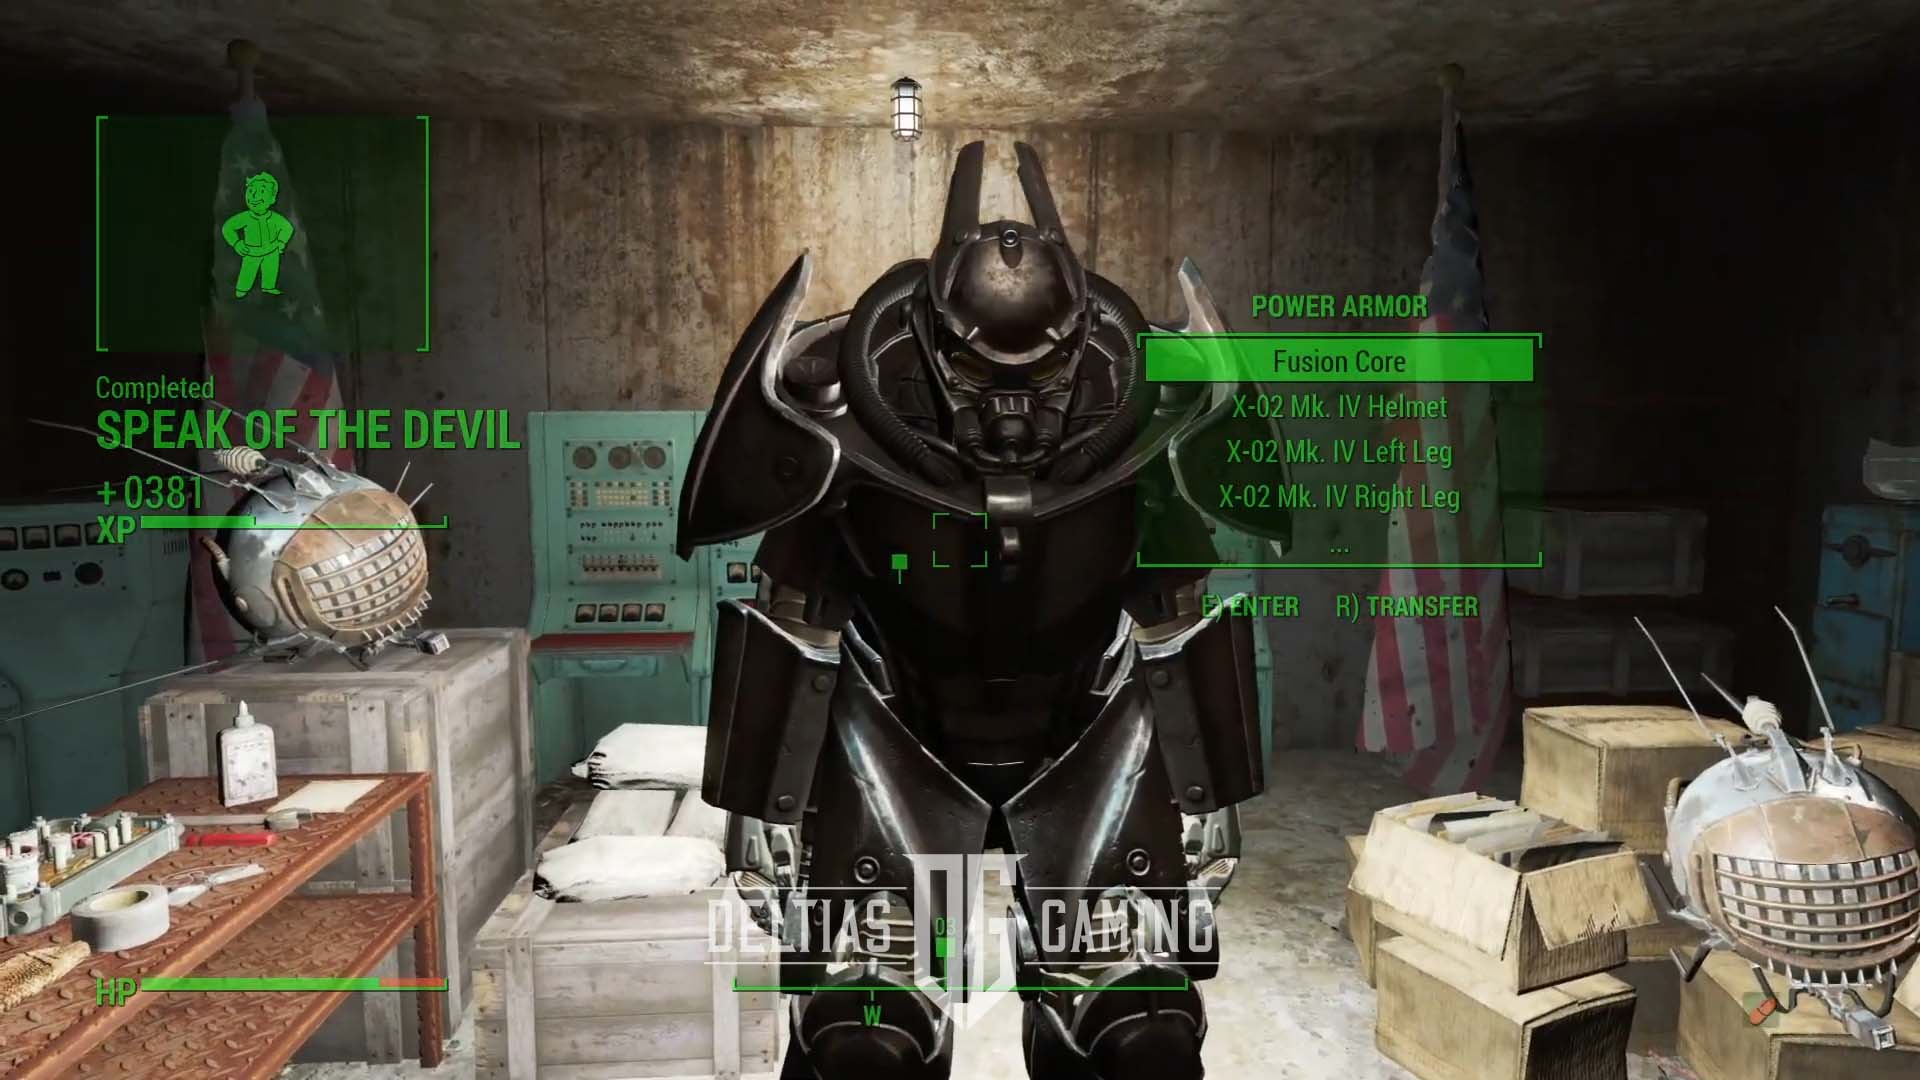 Fallout 4: How to Complete Speak of the Devil Quest